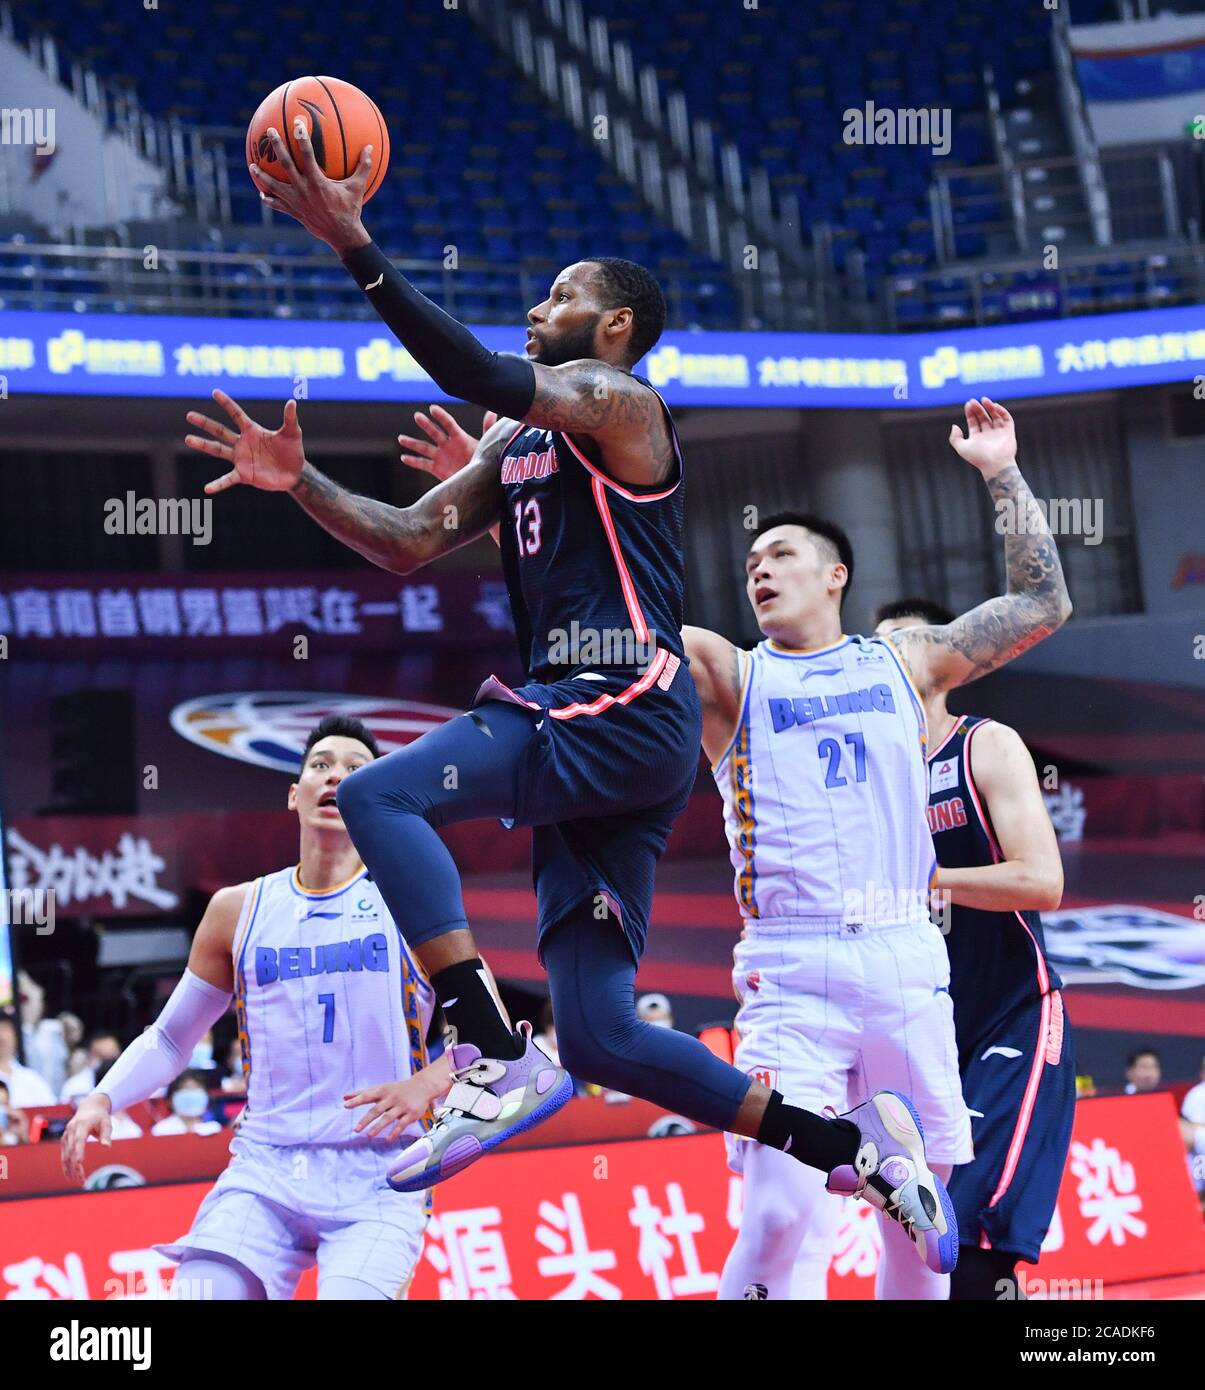 Qingdao, China's Shandong Province. 6th Aug, 2020. Sonny Weems (C) of Guangdong Southern Tigers goes for a basket during the semifinal match between Beijing Ducks and Guangdong Southern Tigers at the 2019-2020 Chinese Basketball Association (CBA) league in Qingdao, east China's Shandong Province, Aug. 6, 2020. Credit: Zhu Zheng/Xinhua/Alamy Live News Stock Photo